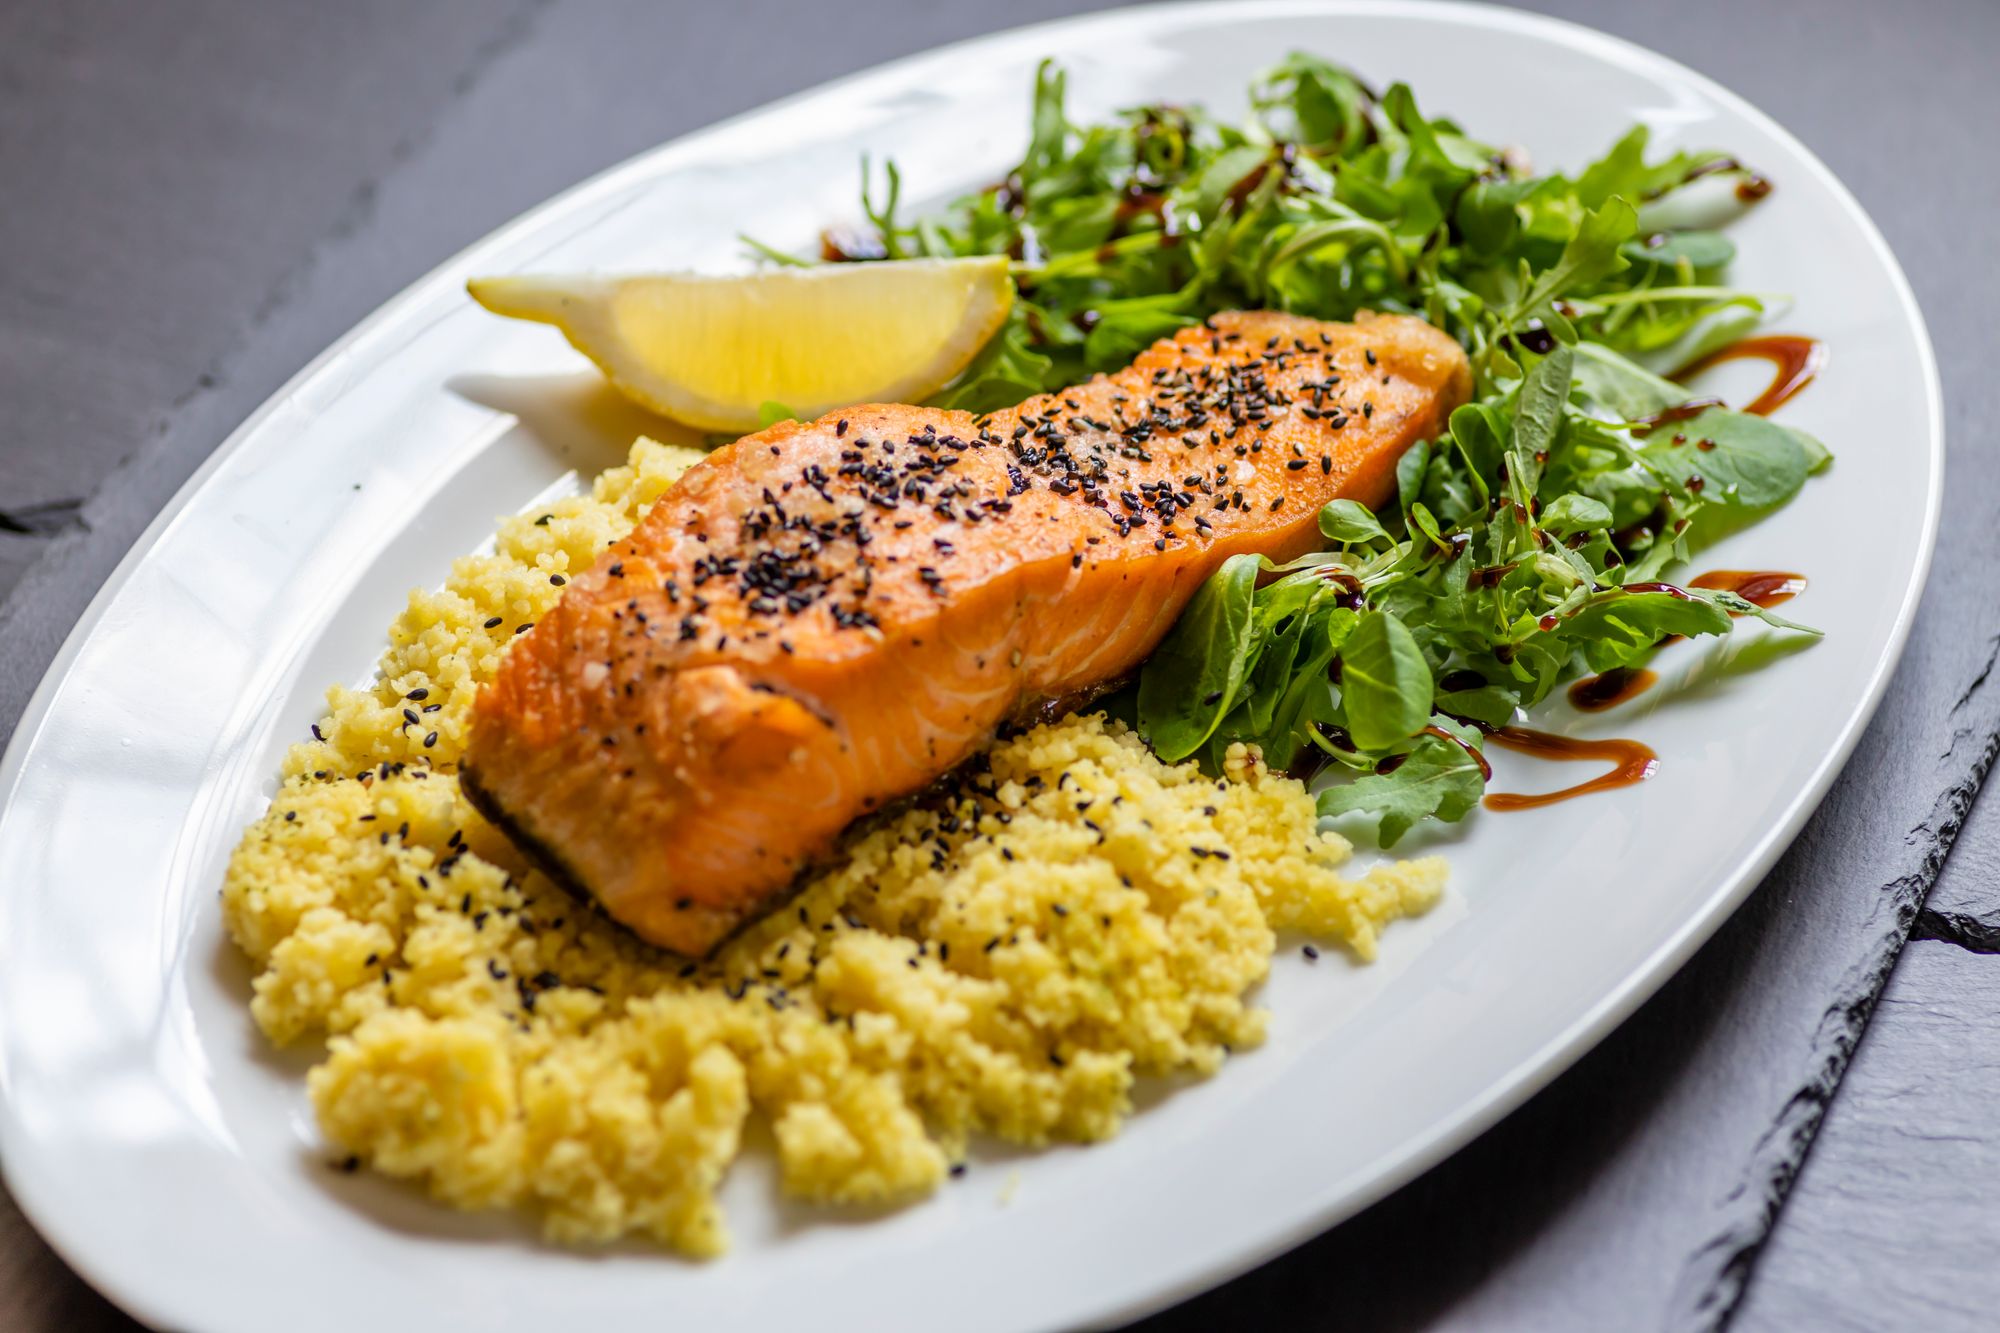 Hot Smoked Salmon with Lemon and Herb Couscous